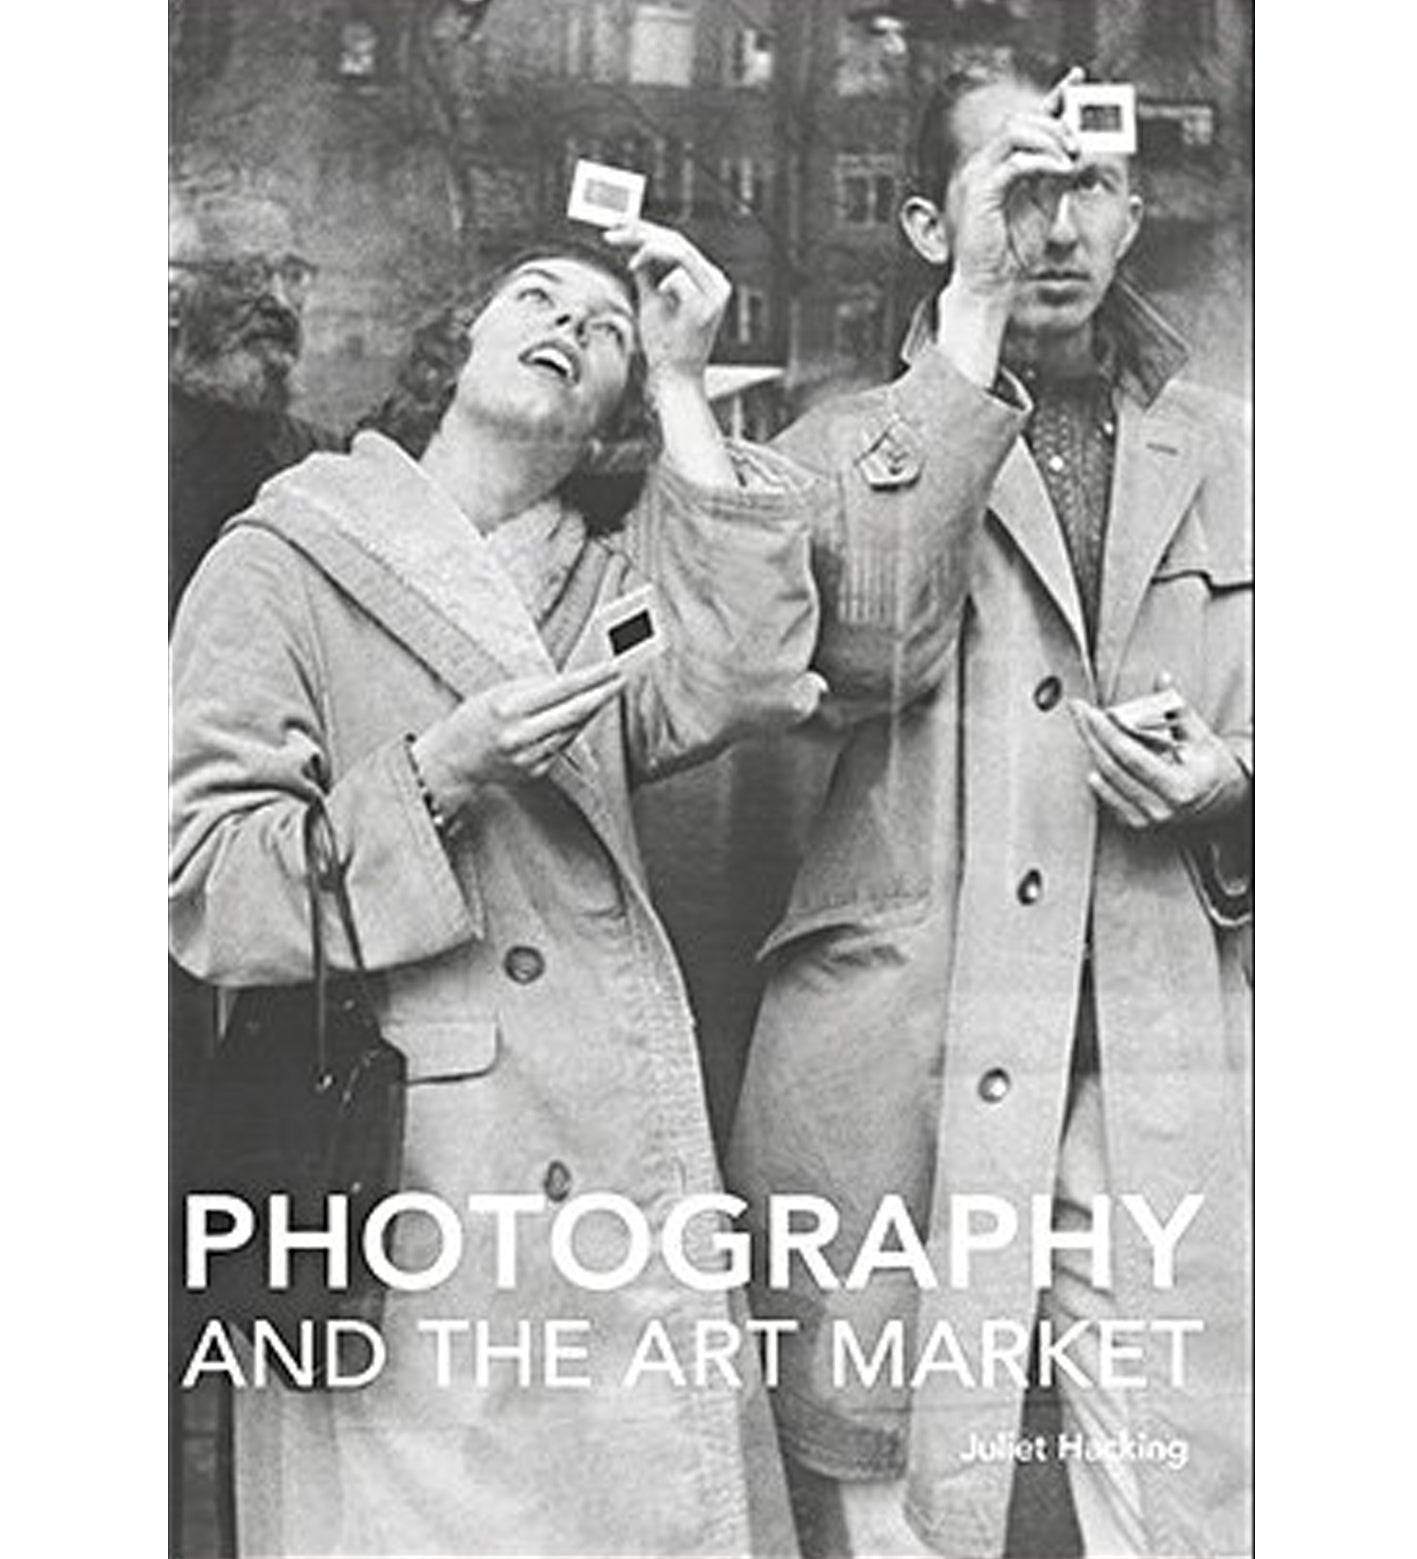 Juliet Hacking: Photography and the Art Market